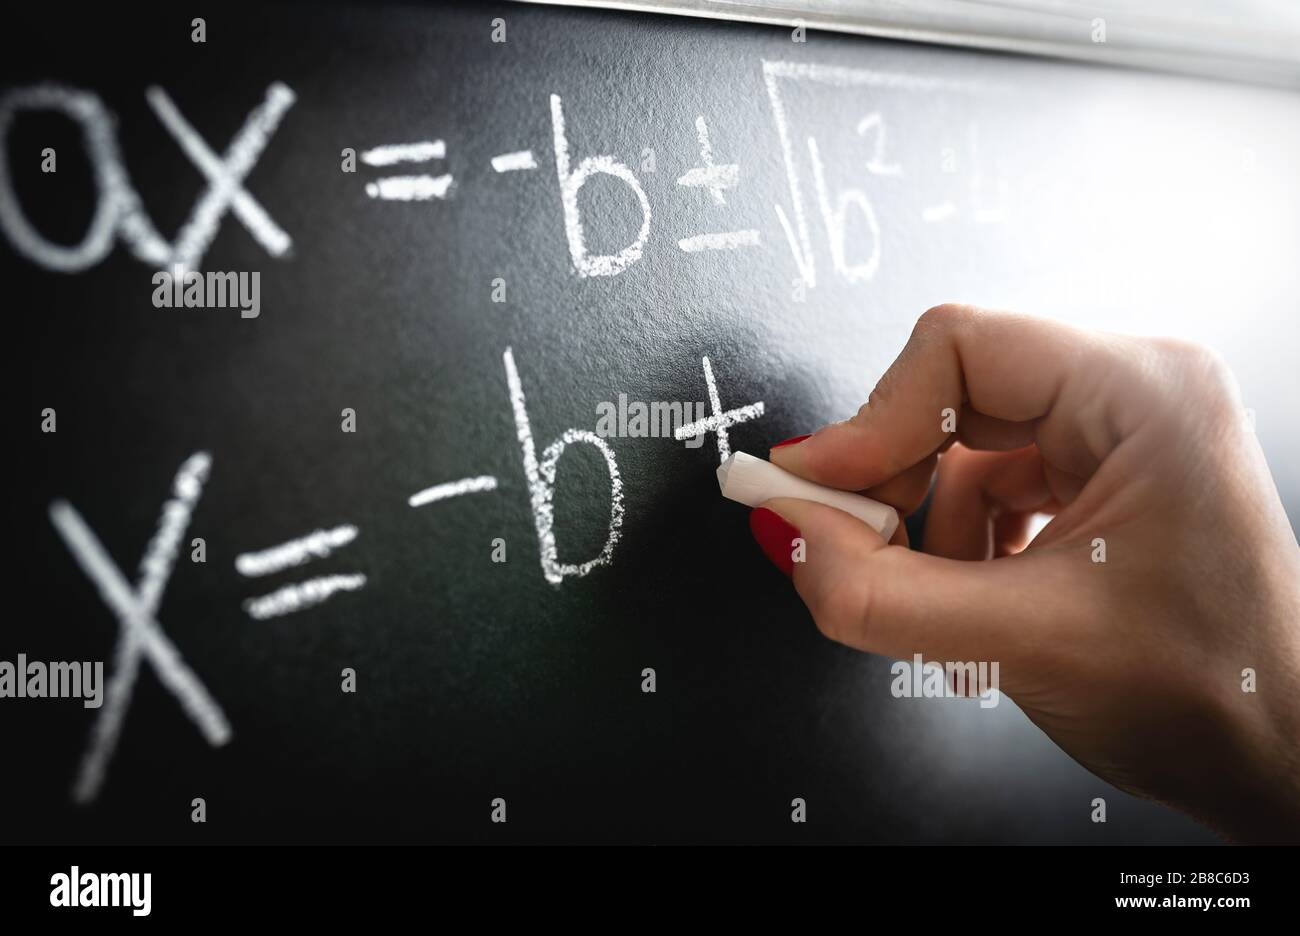 Math equation, function or calculation on chalkboard. Teacher writing on blackboard during lesson and lecture in school classroom. Stock Photo